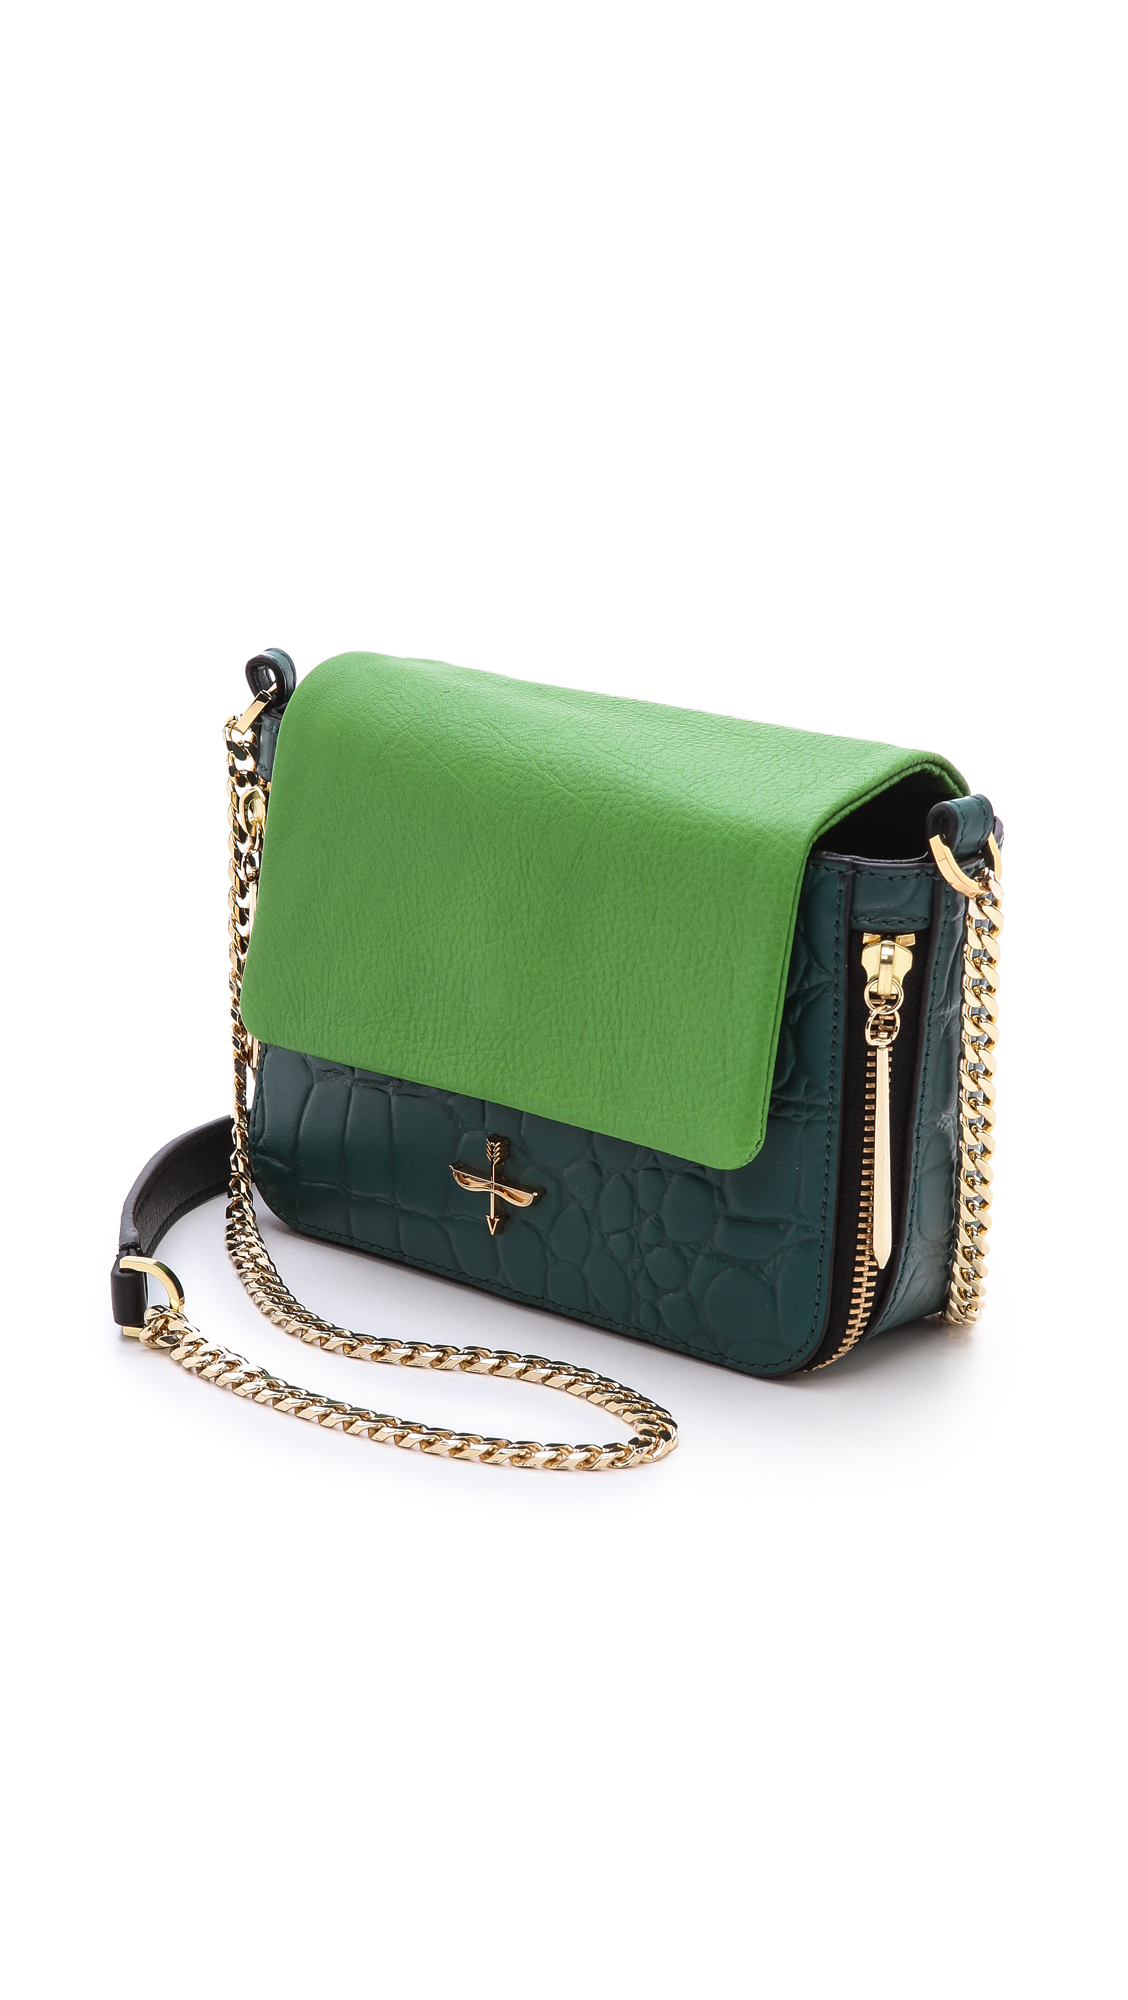 Pour La Victoire Yves Alsace Cross Body Bag in Green - Lyst